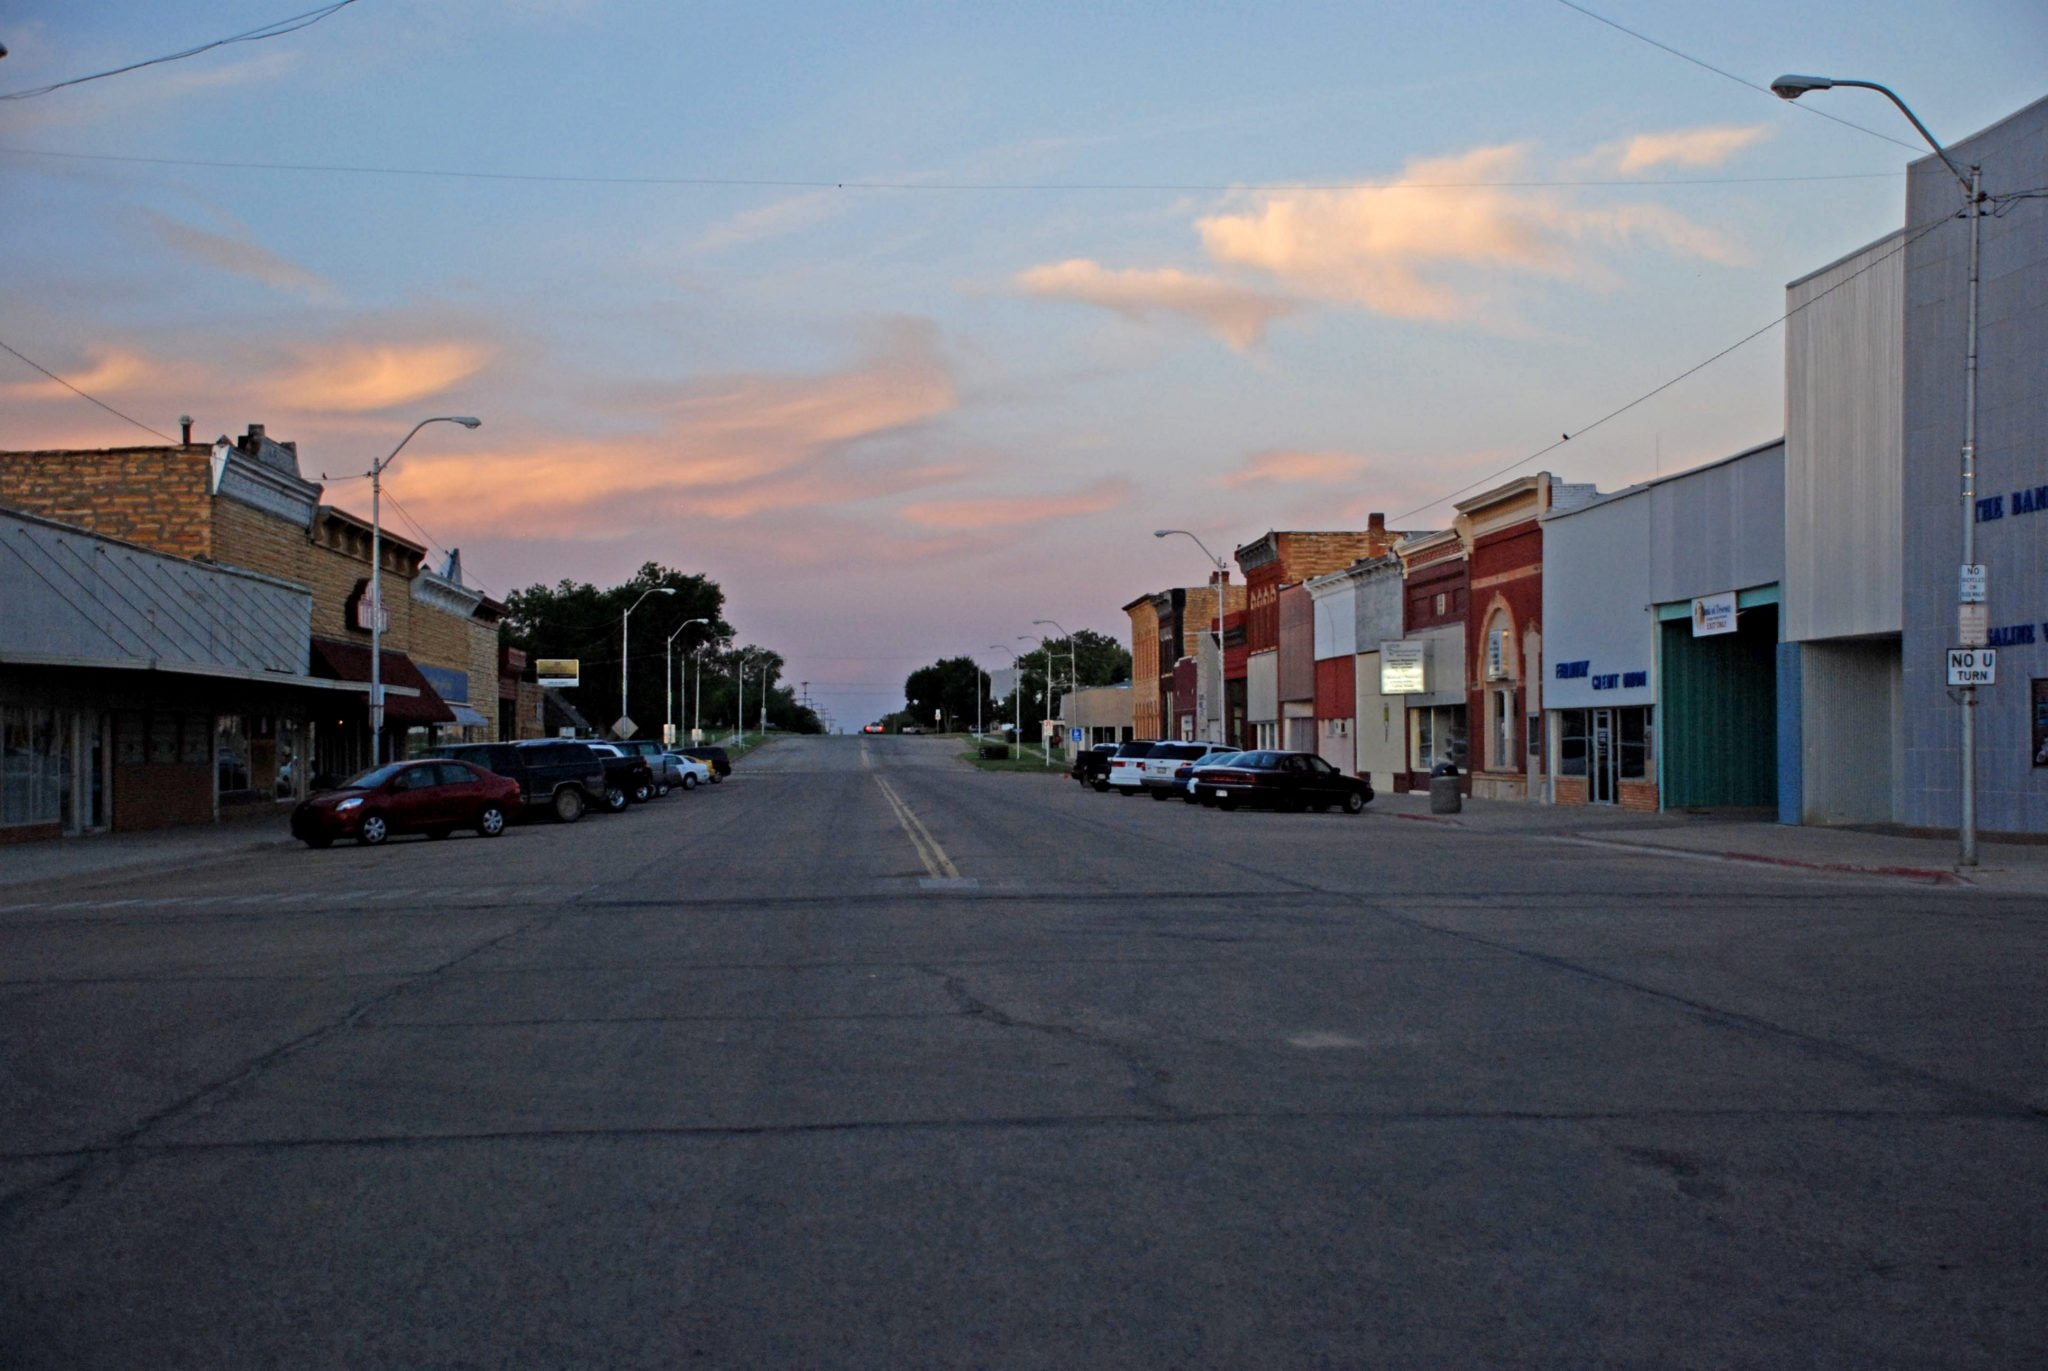 Small town, creative commons pic